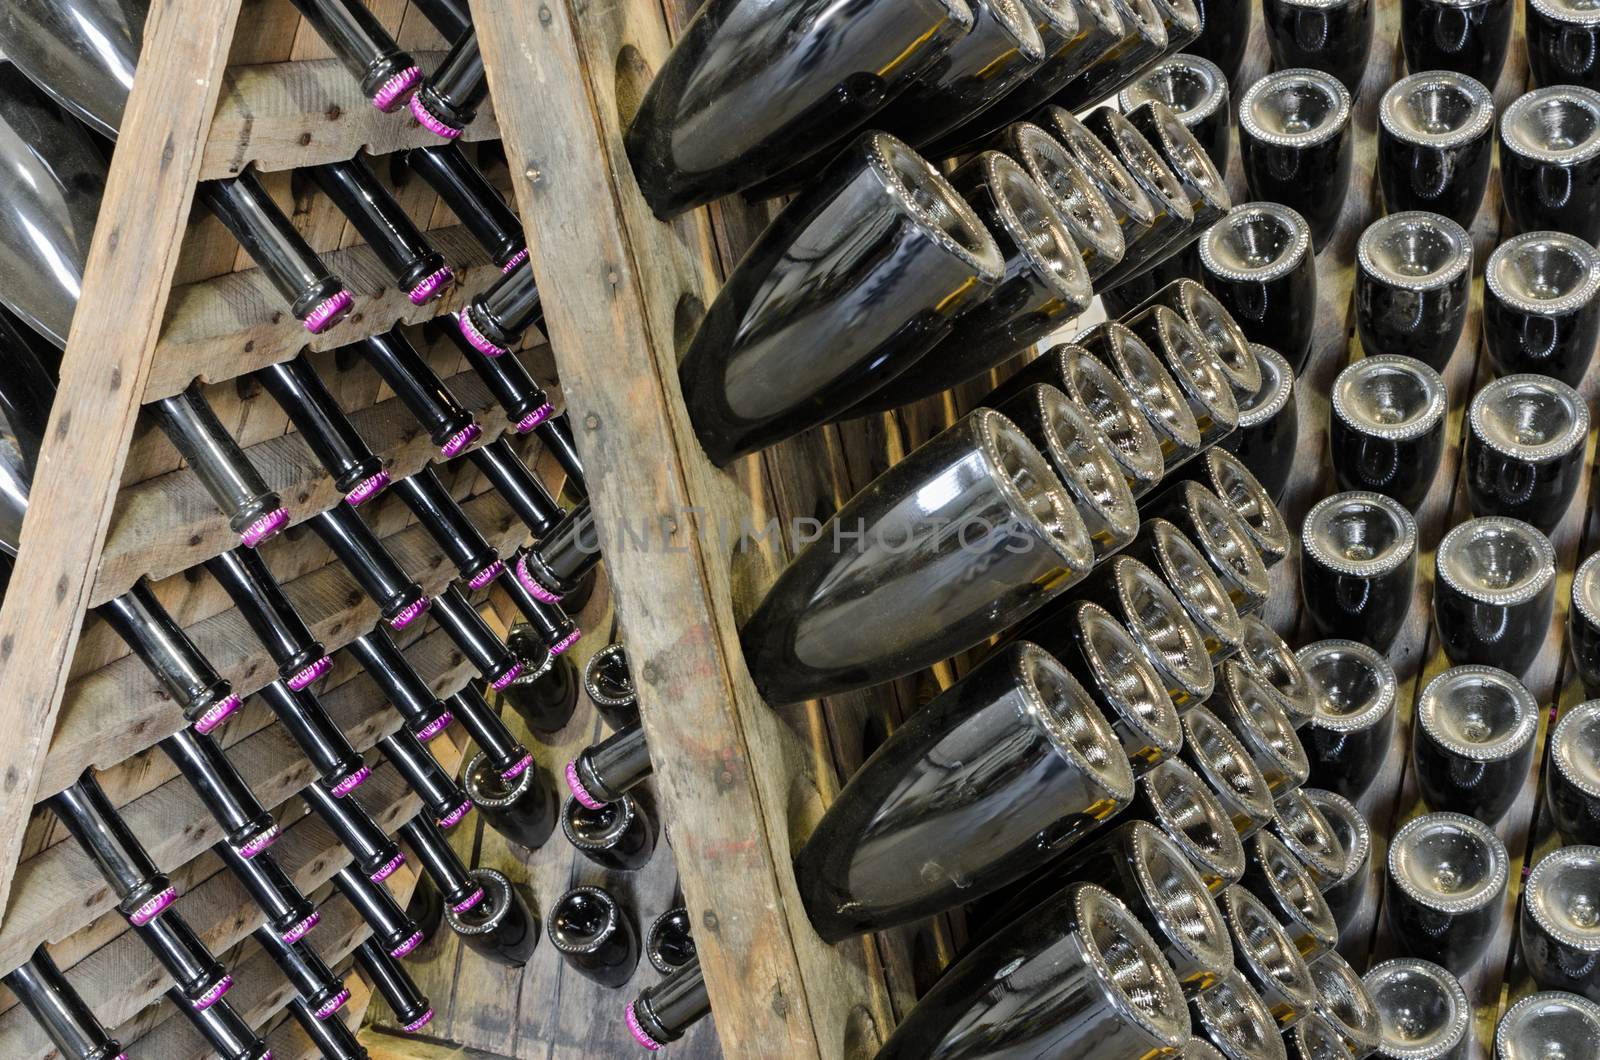 Dusty bottles with brut sparkling wine on wooden rack in winery vault